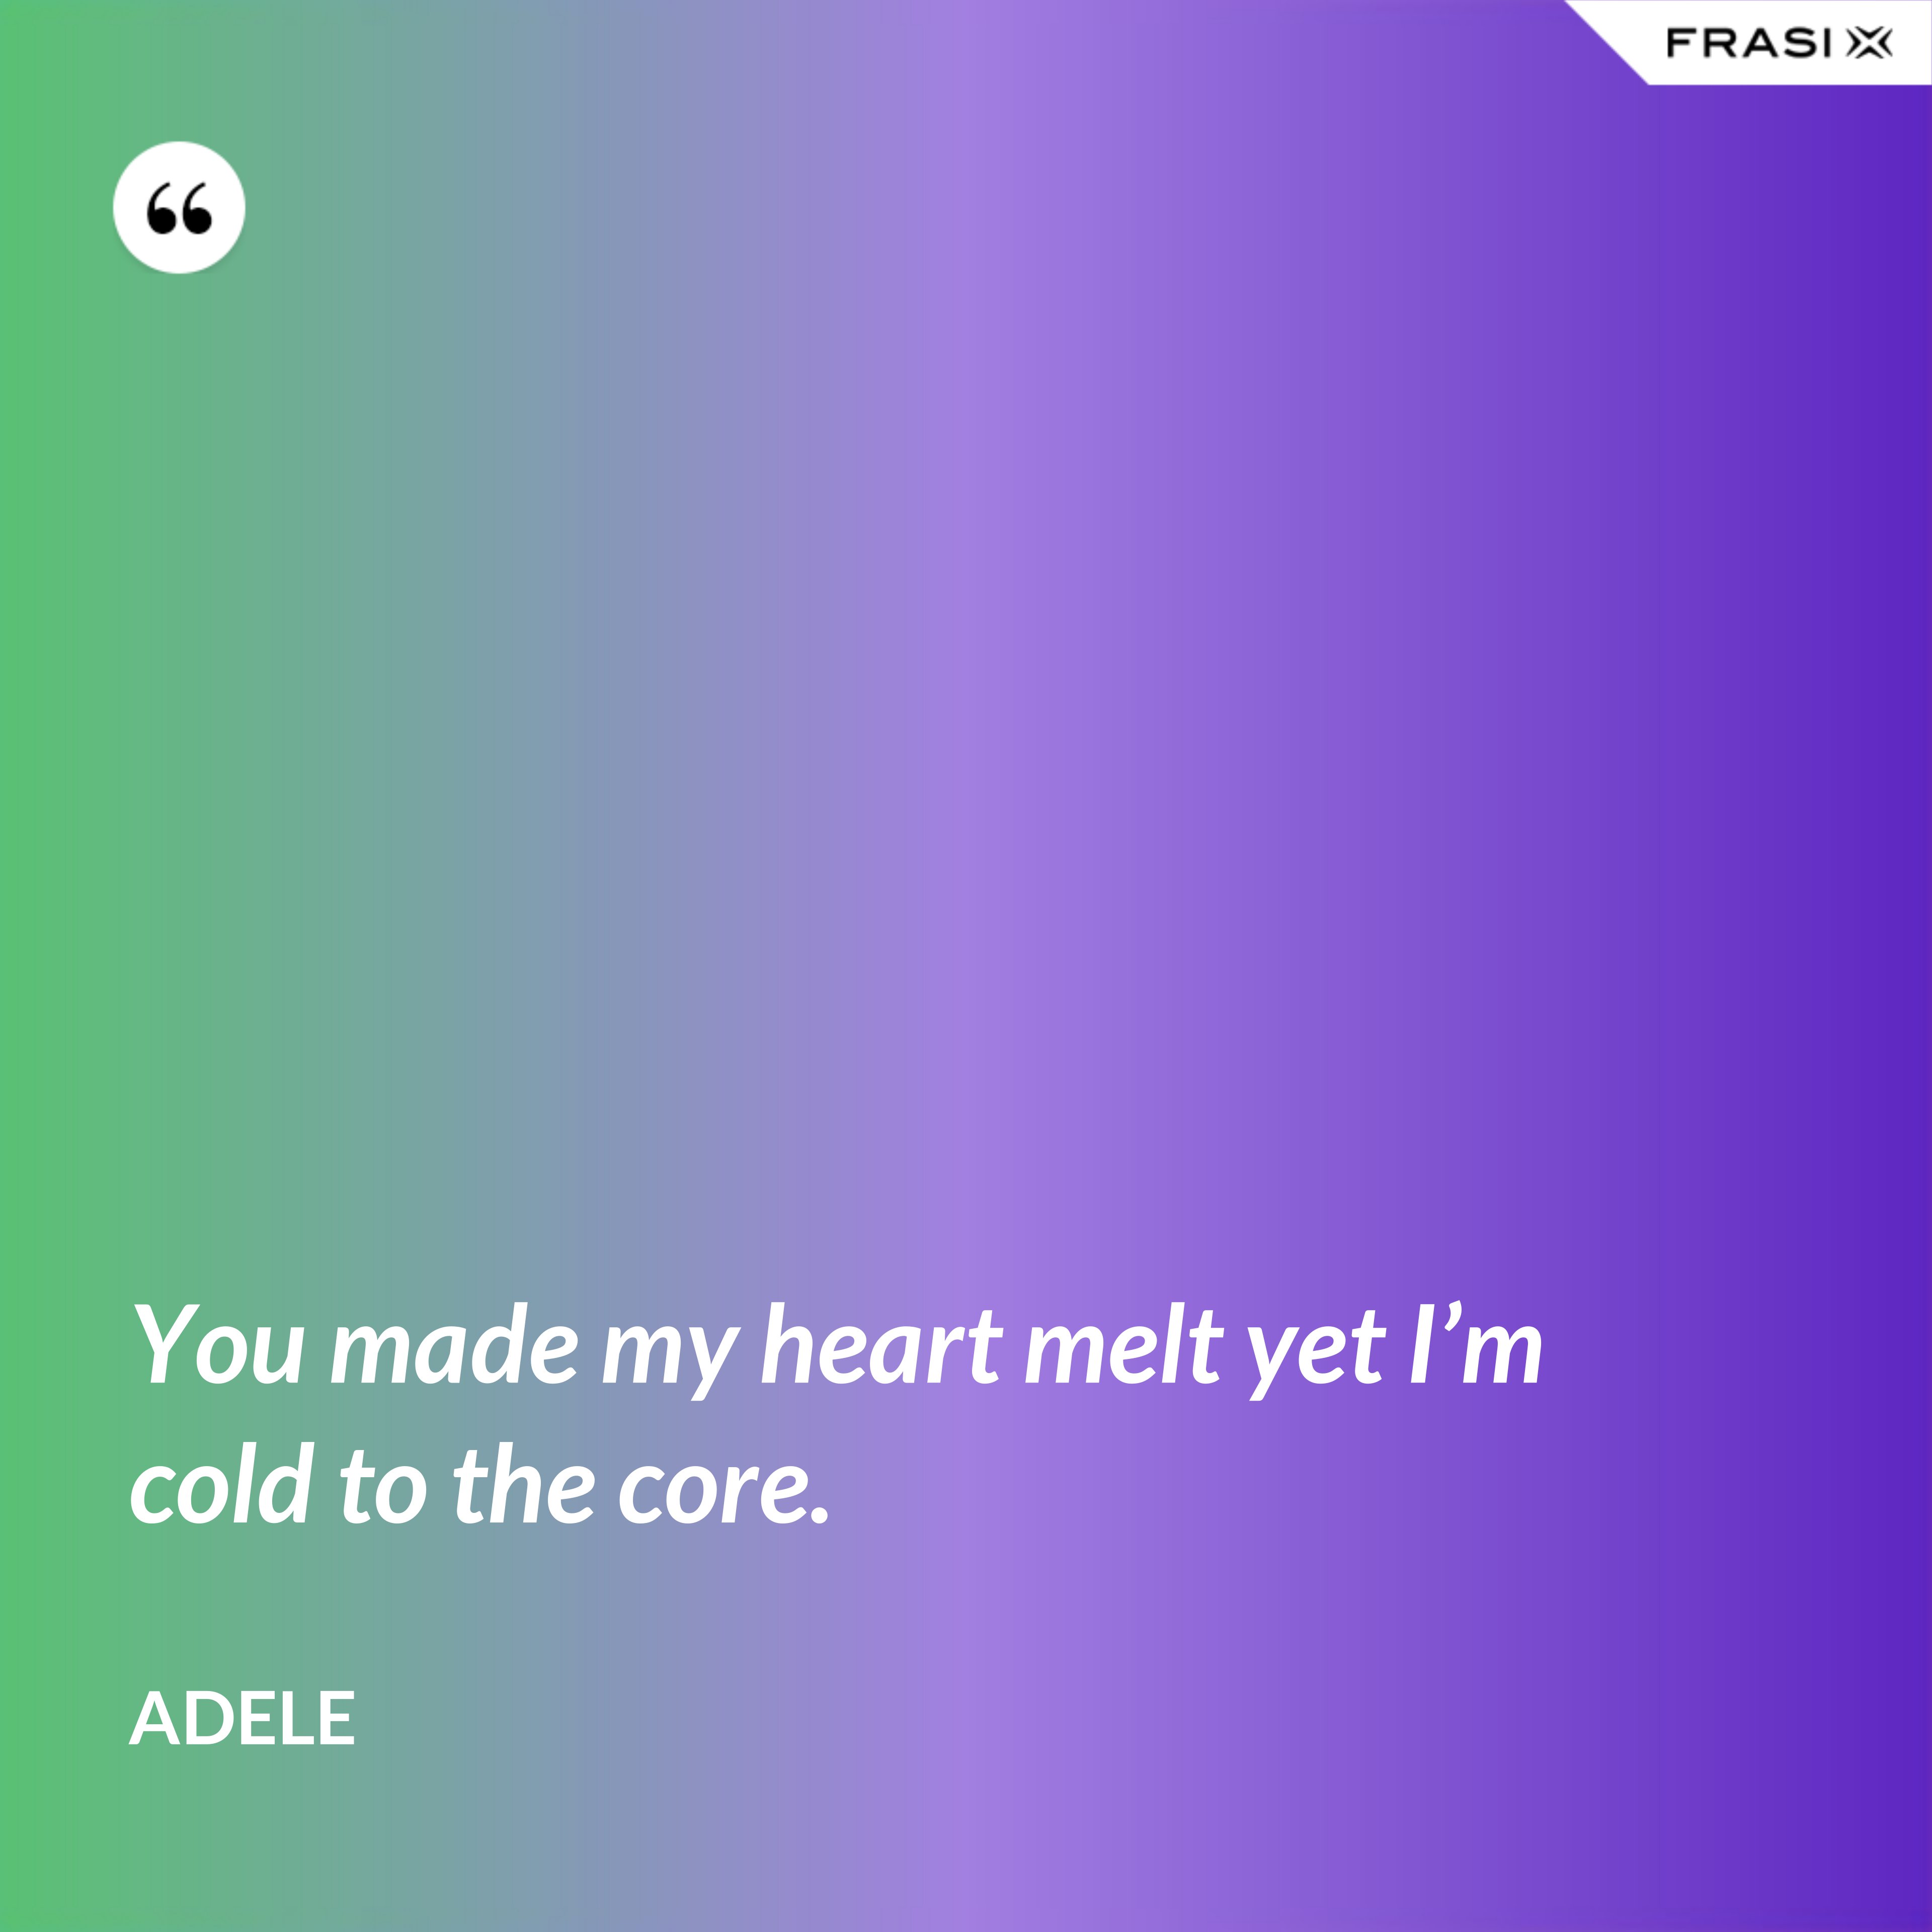 You made my heart melt yet I’m cold to the core. - Adele